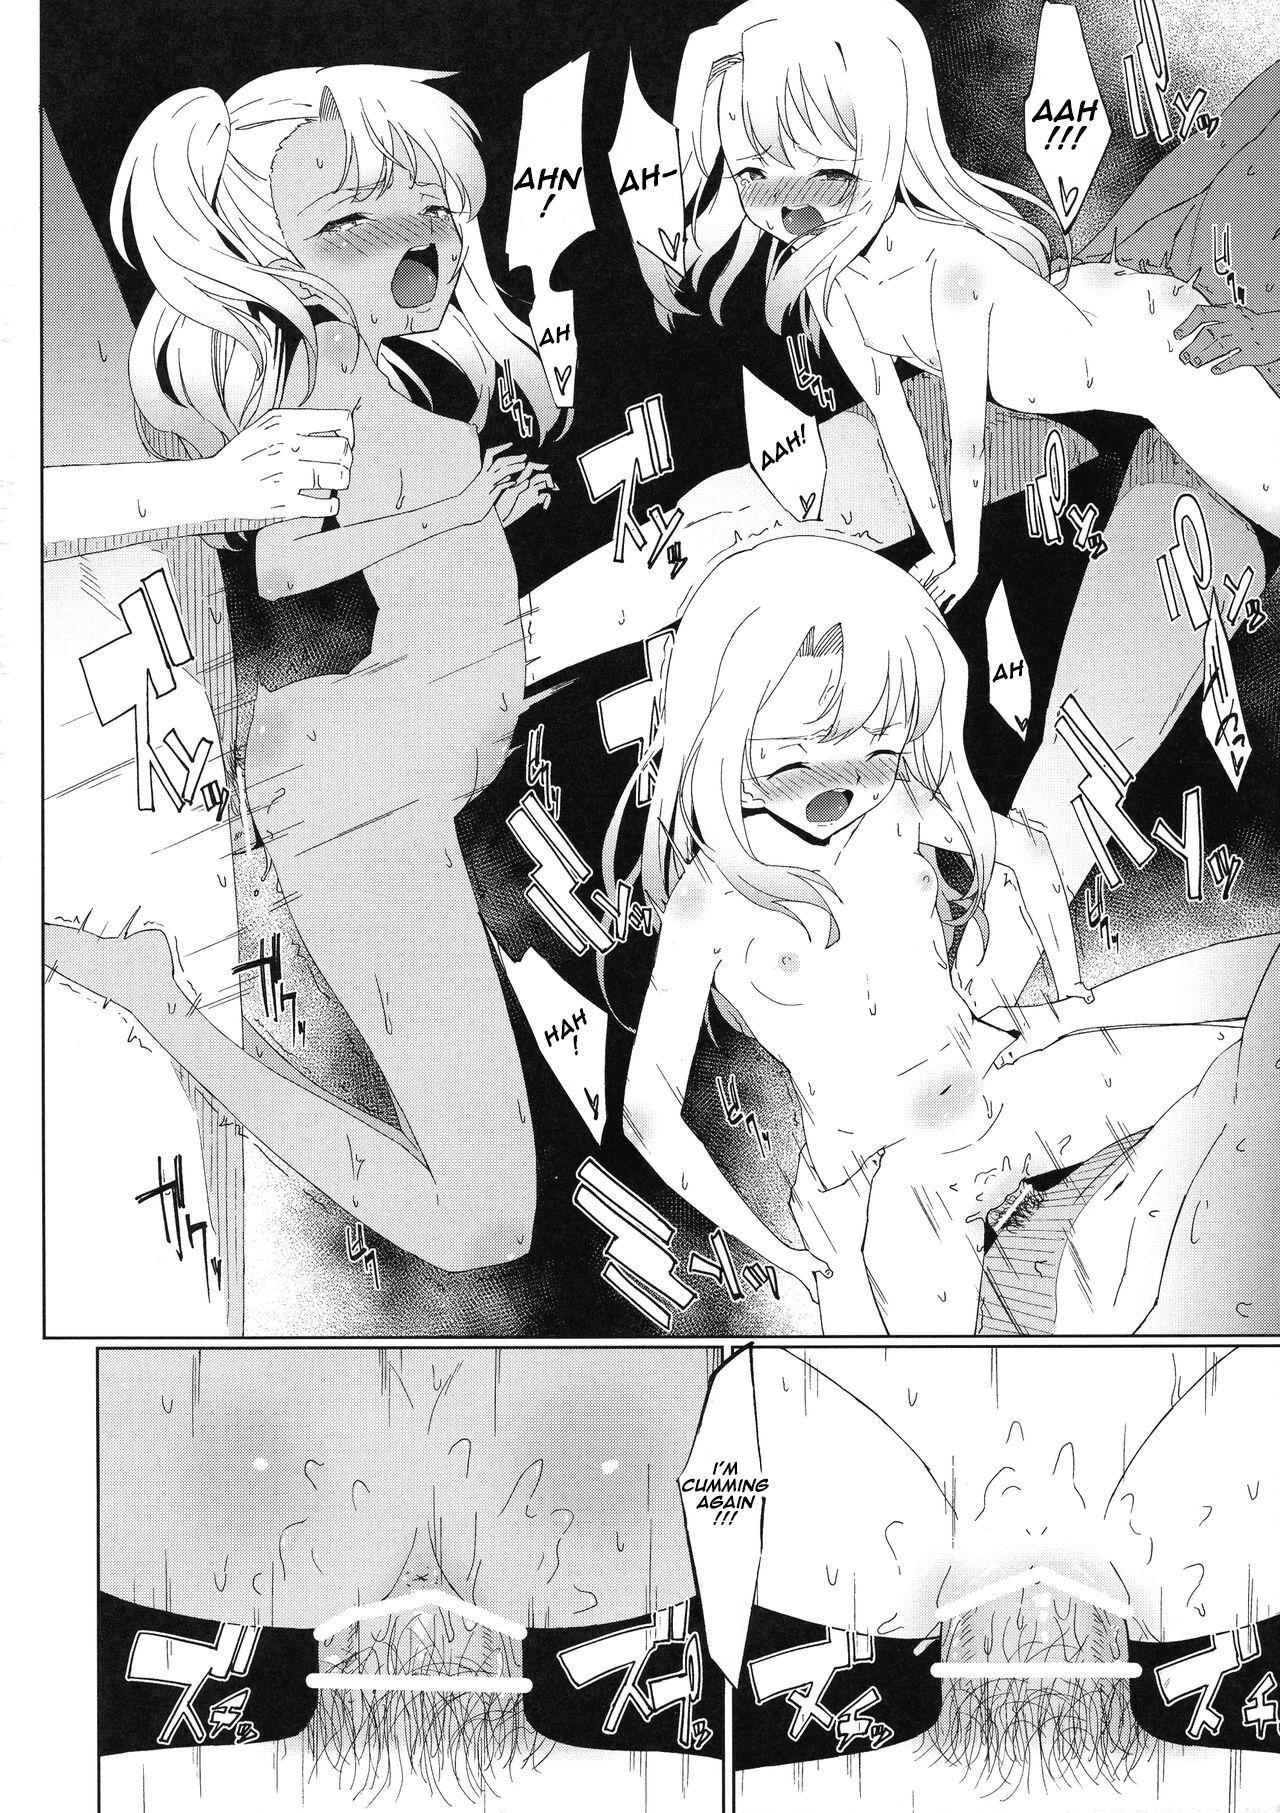 Viet Nam Oshiete Onii-chan - Fate kaleid liner prisma illya Perfect Butt - Page 10